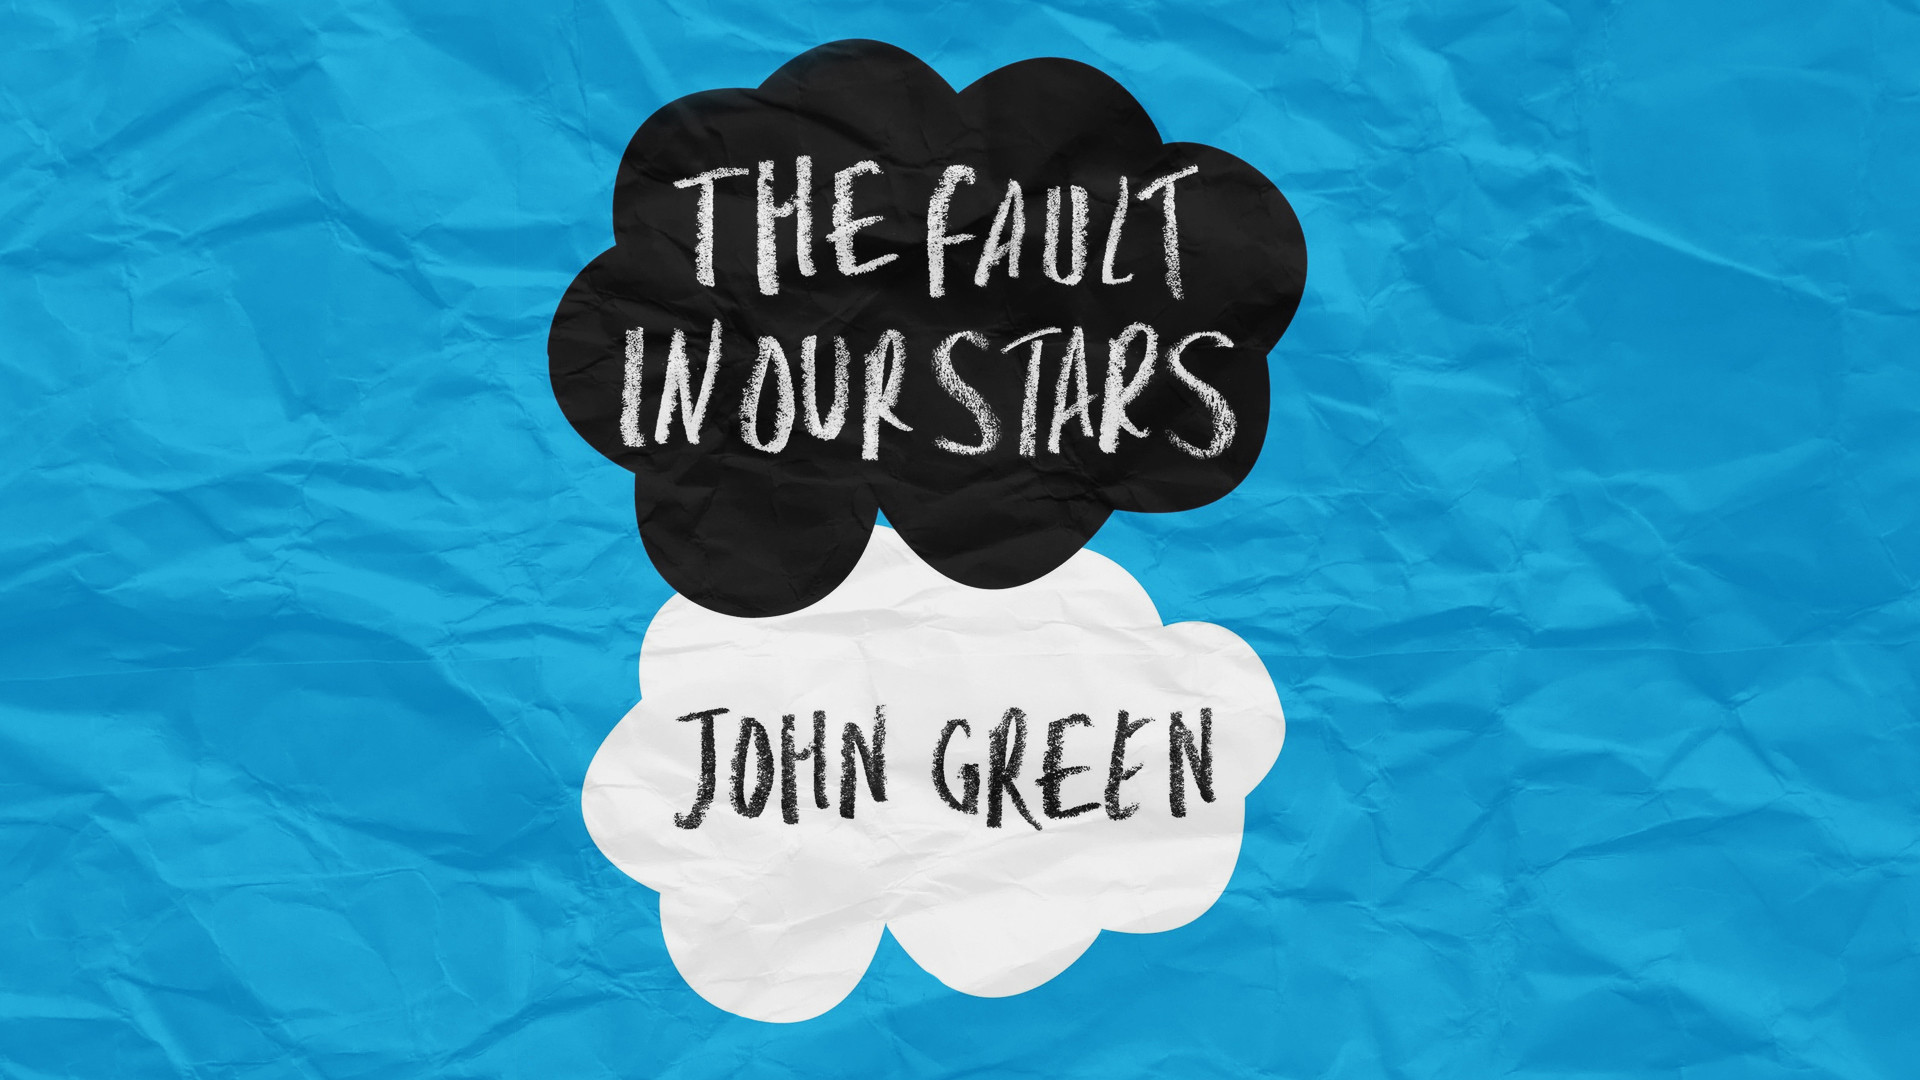 The one where John Green goes on the TFIOS set